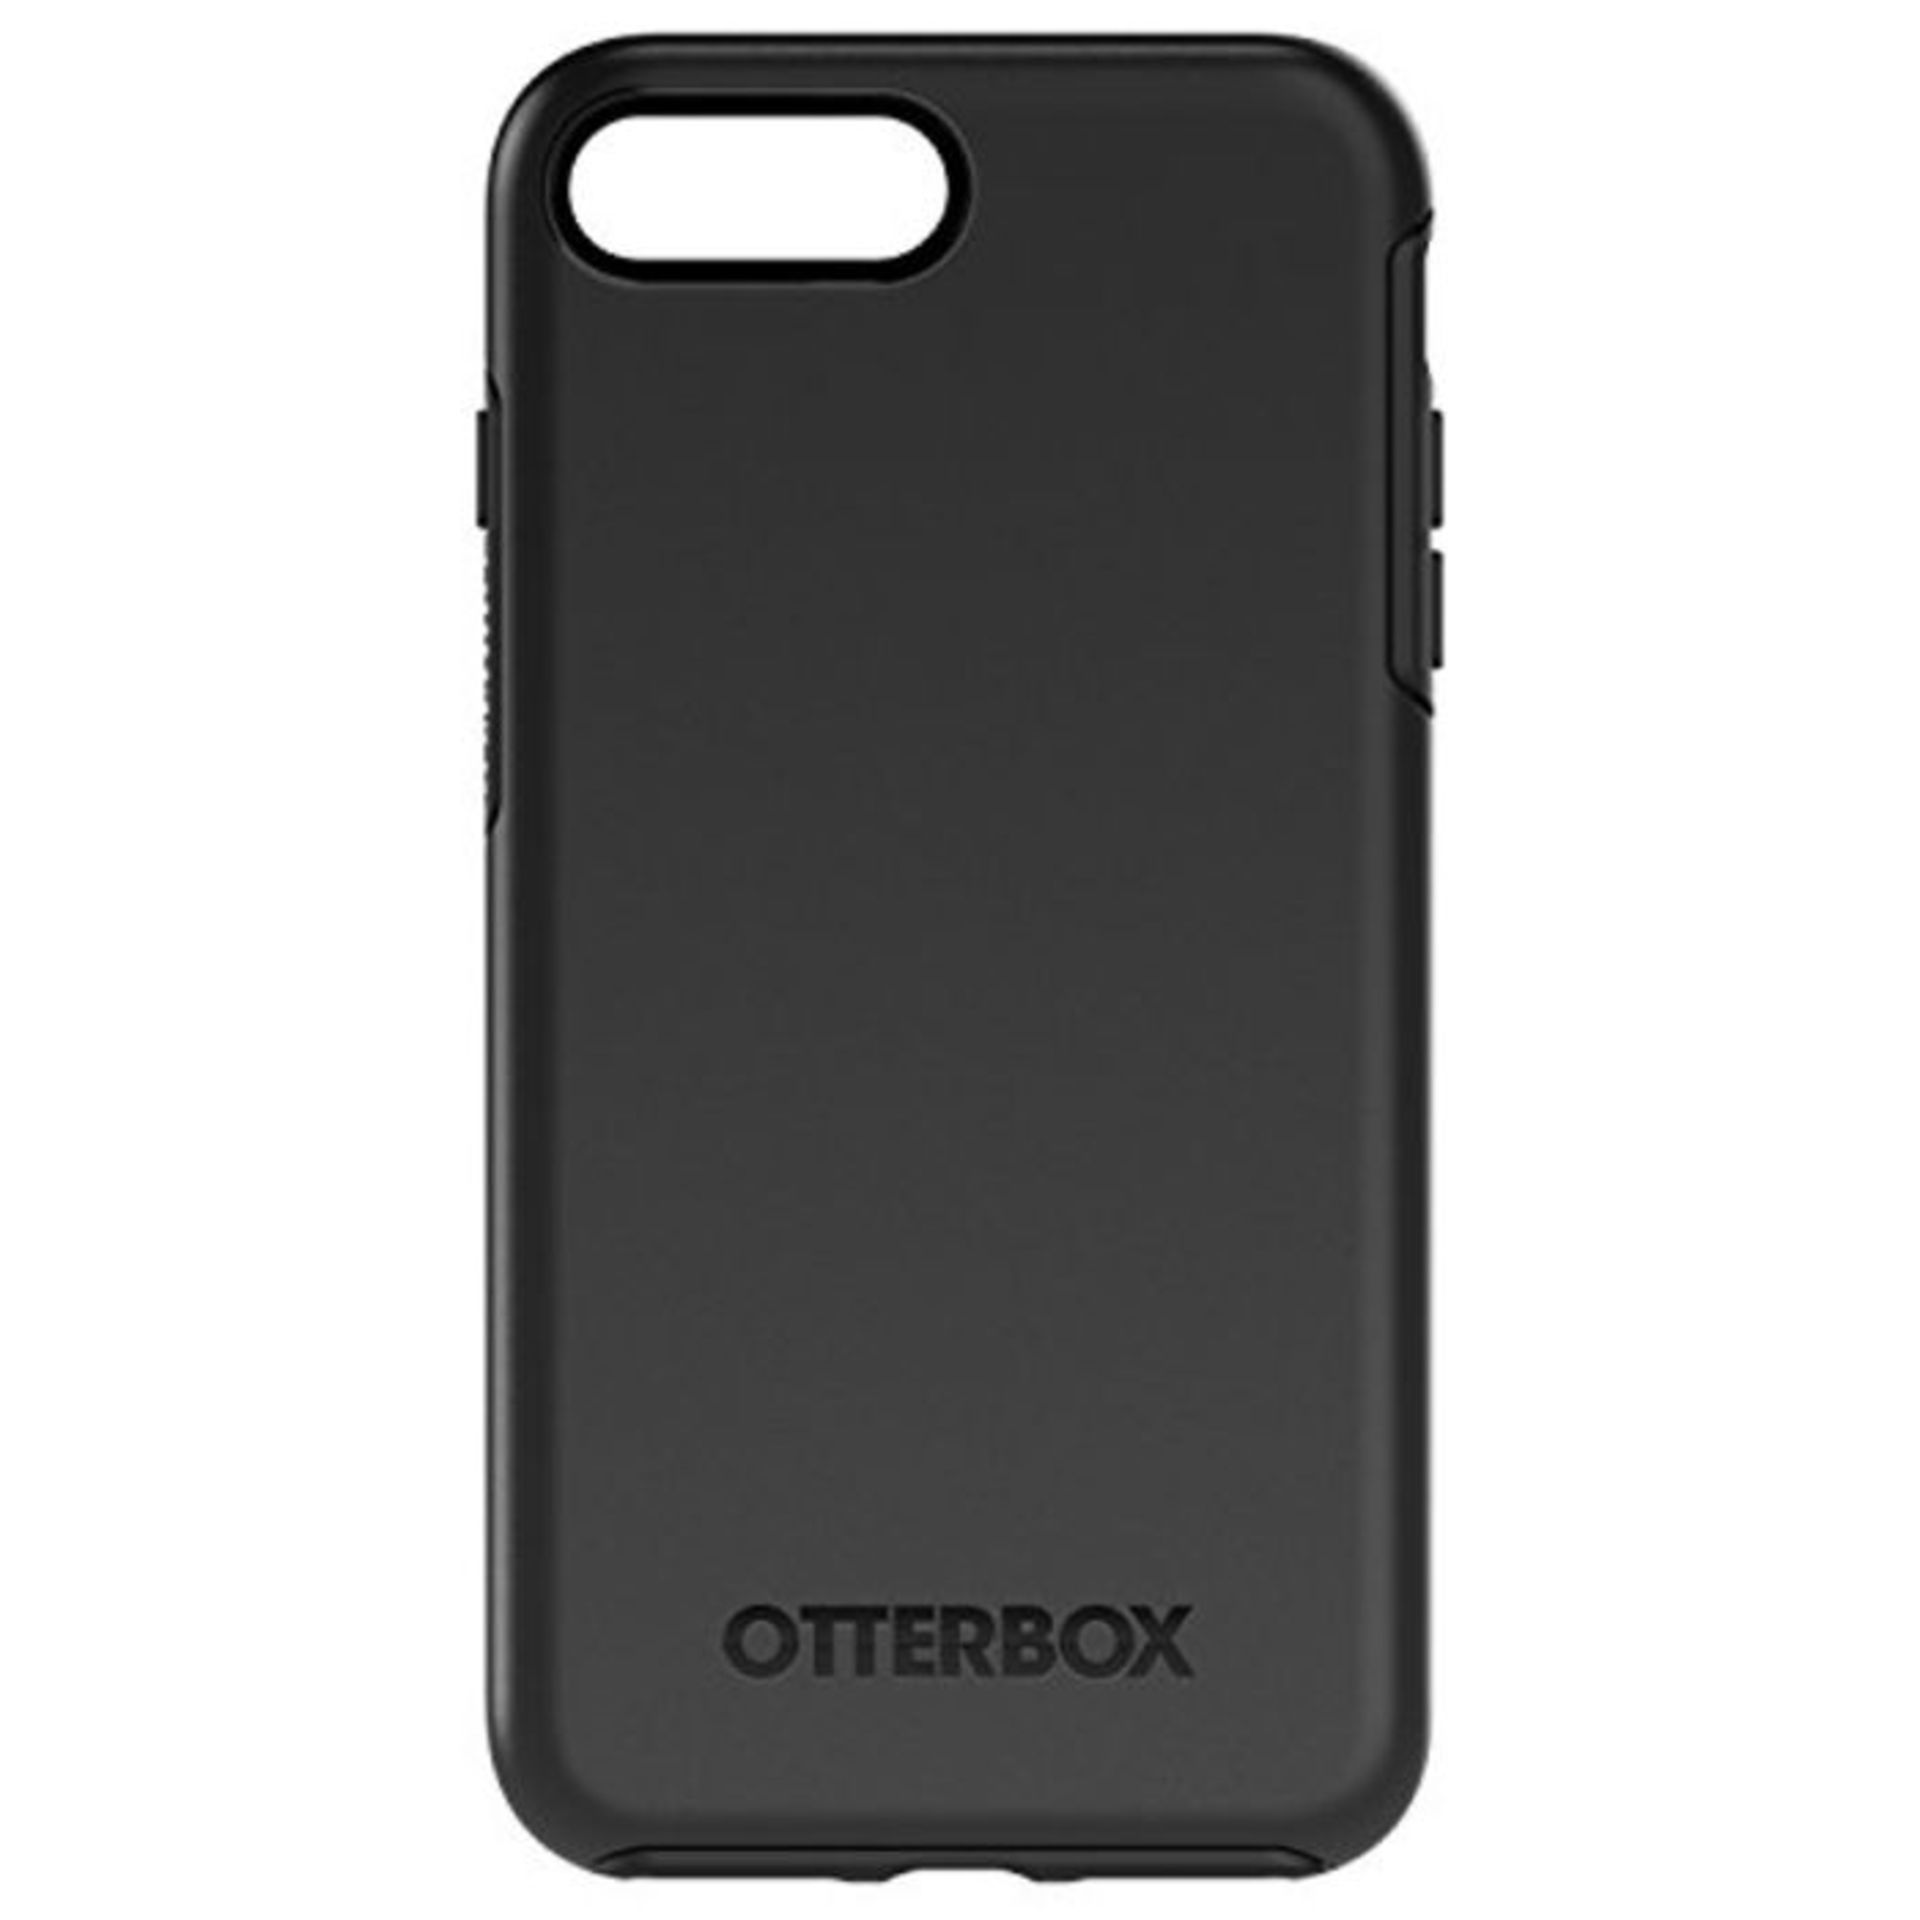 Otterbox Symmetry Slim and stylish shockproof case for iPhone 7 Plus / 8 Plus Black